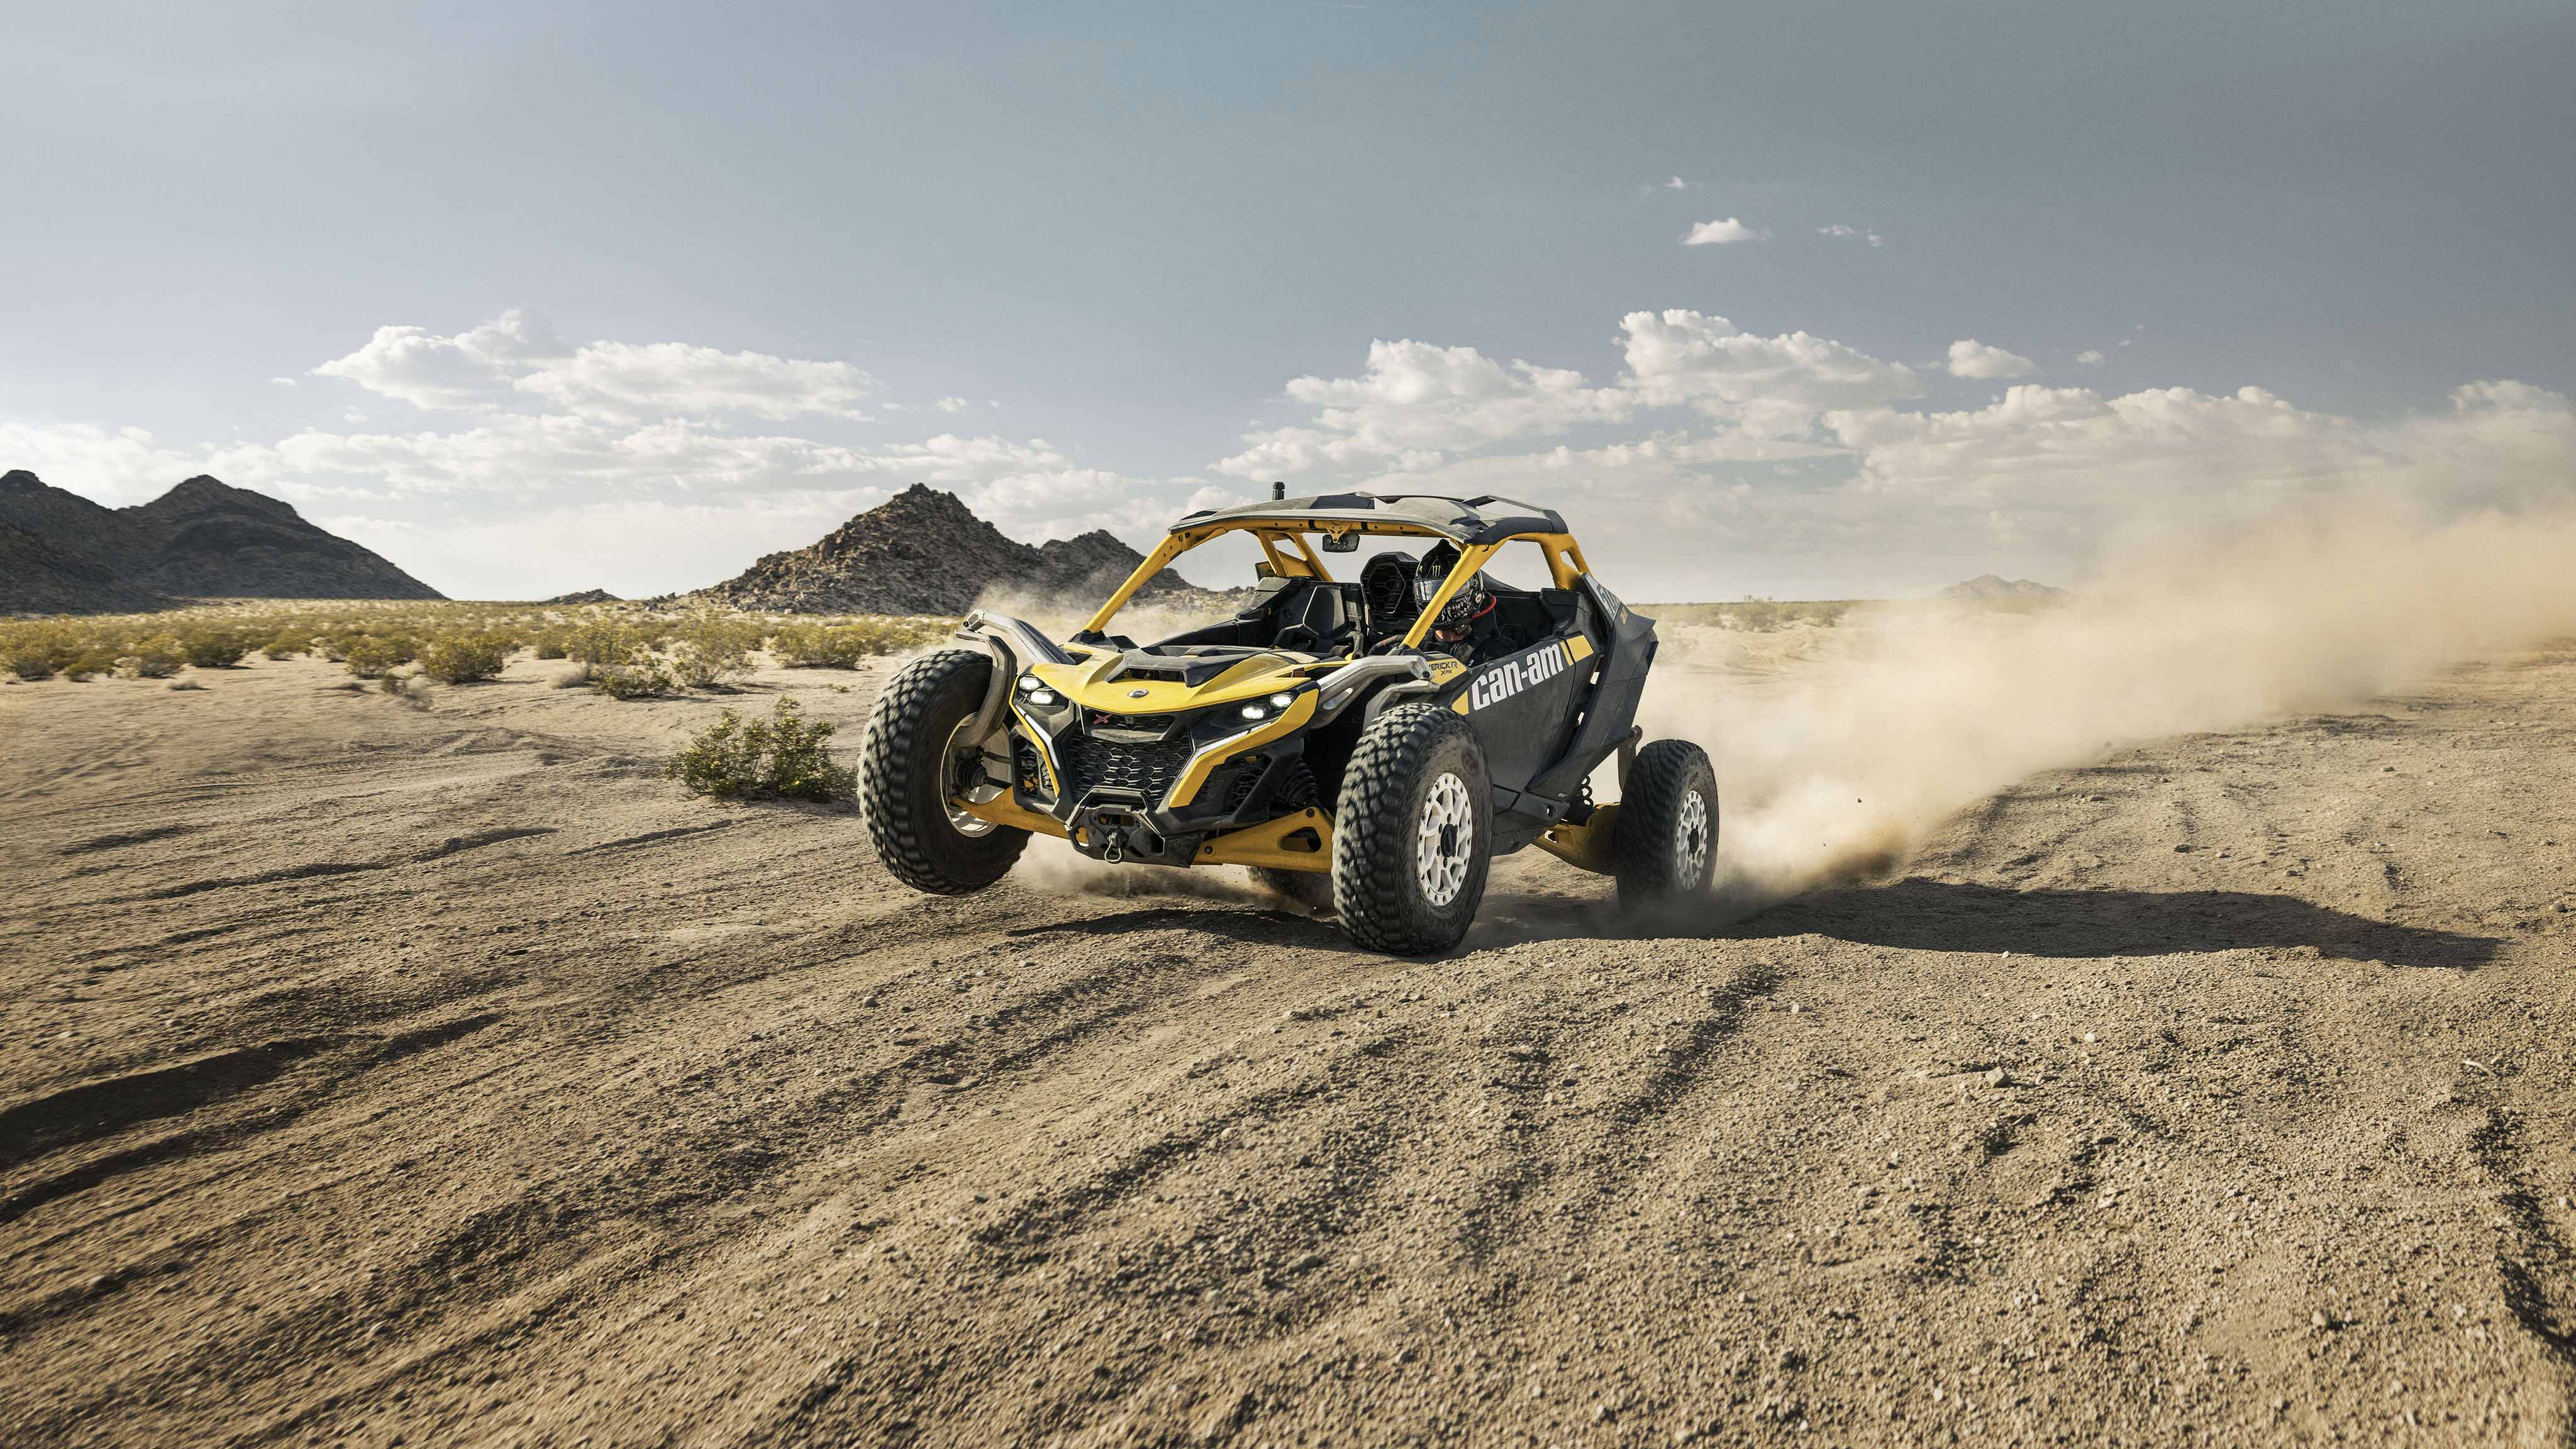 A rider in a Can-Am Maverick R driving in the desert